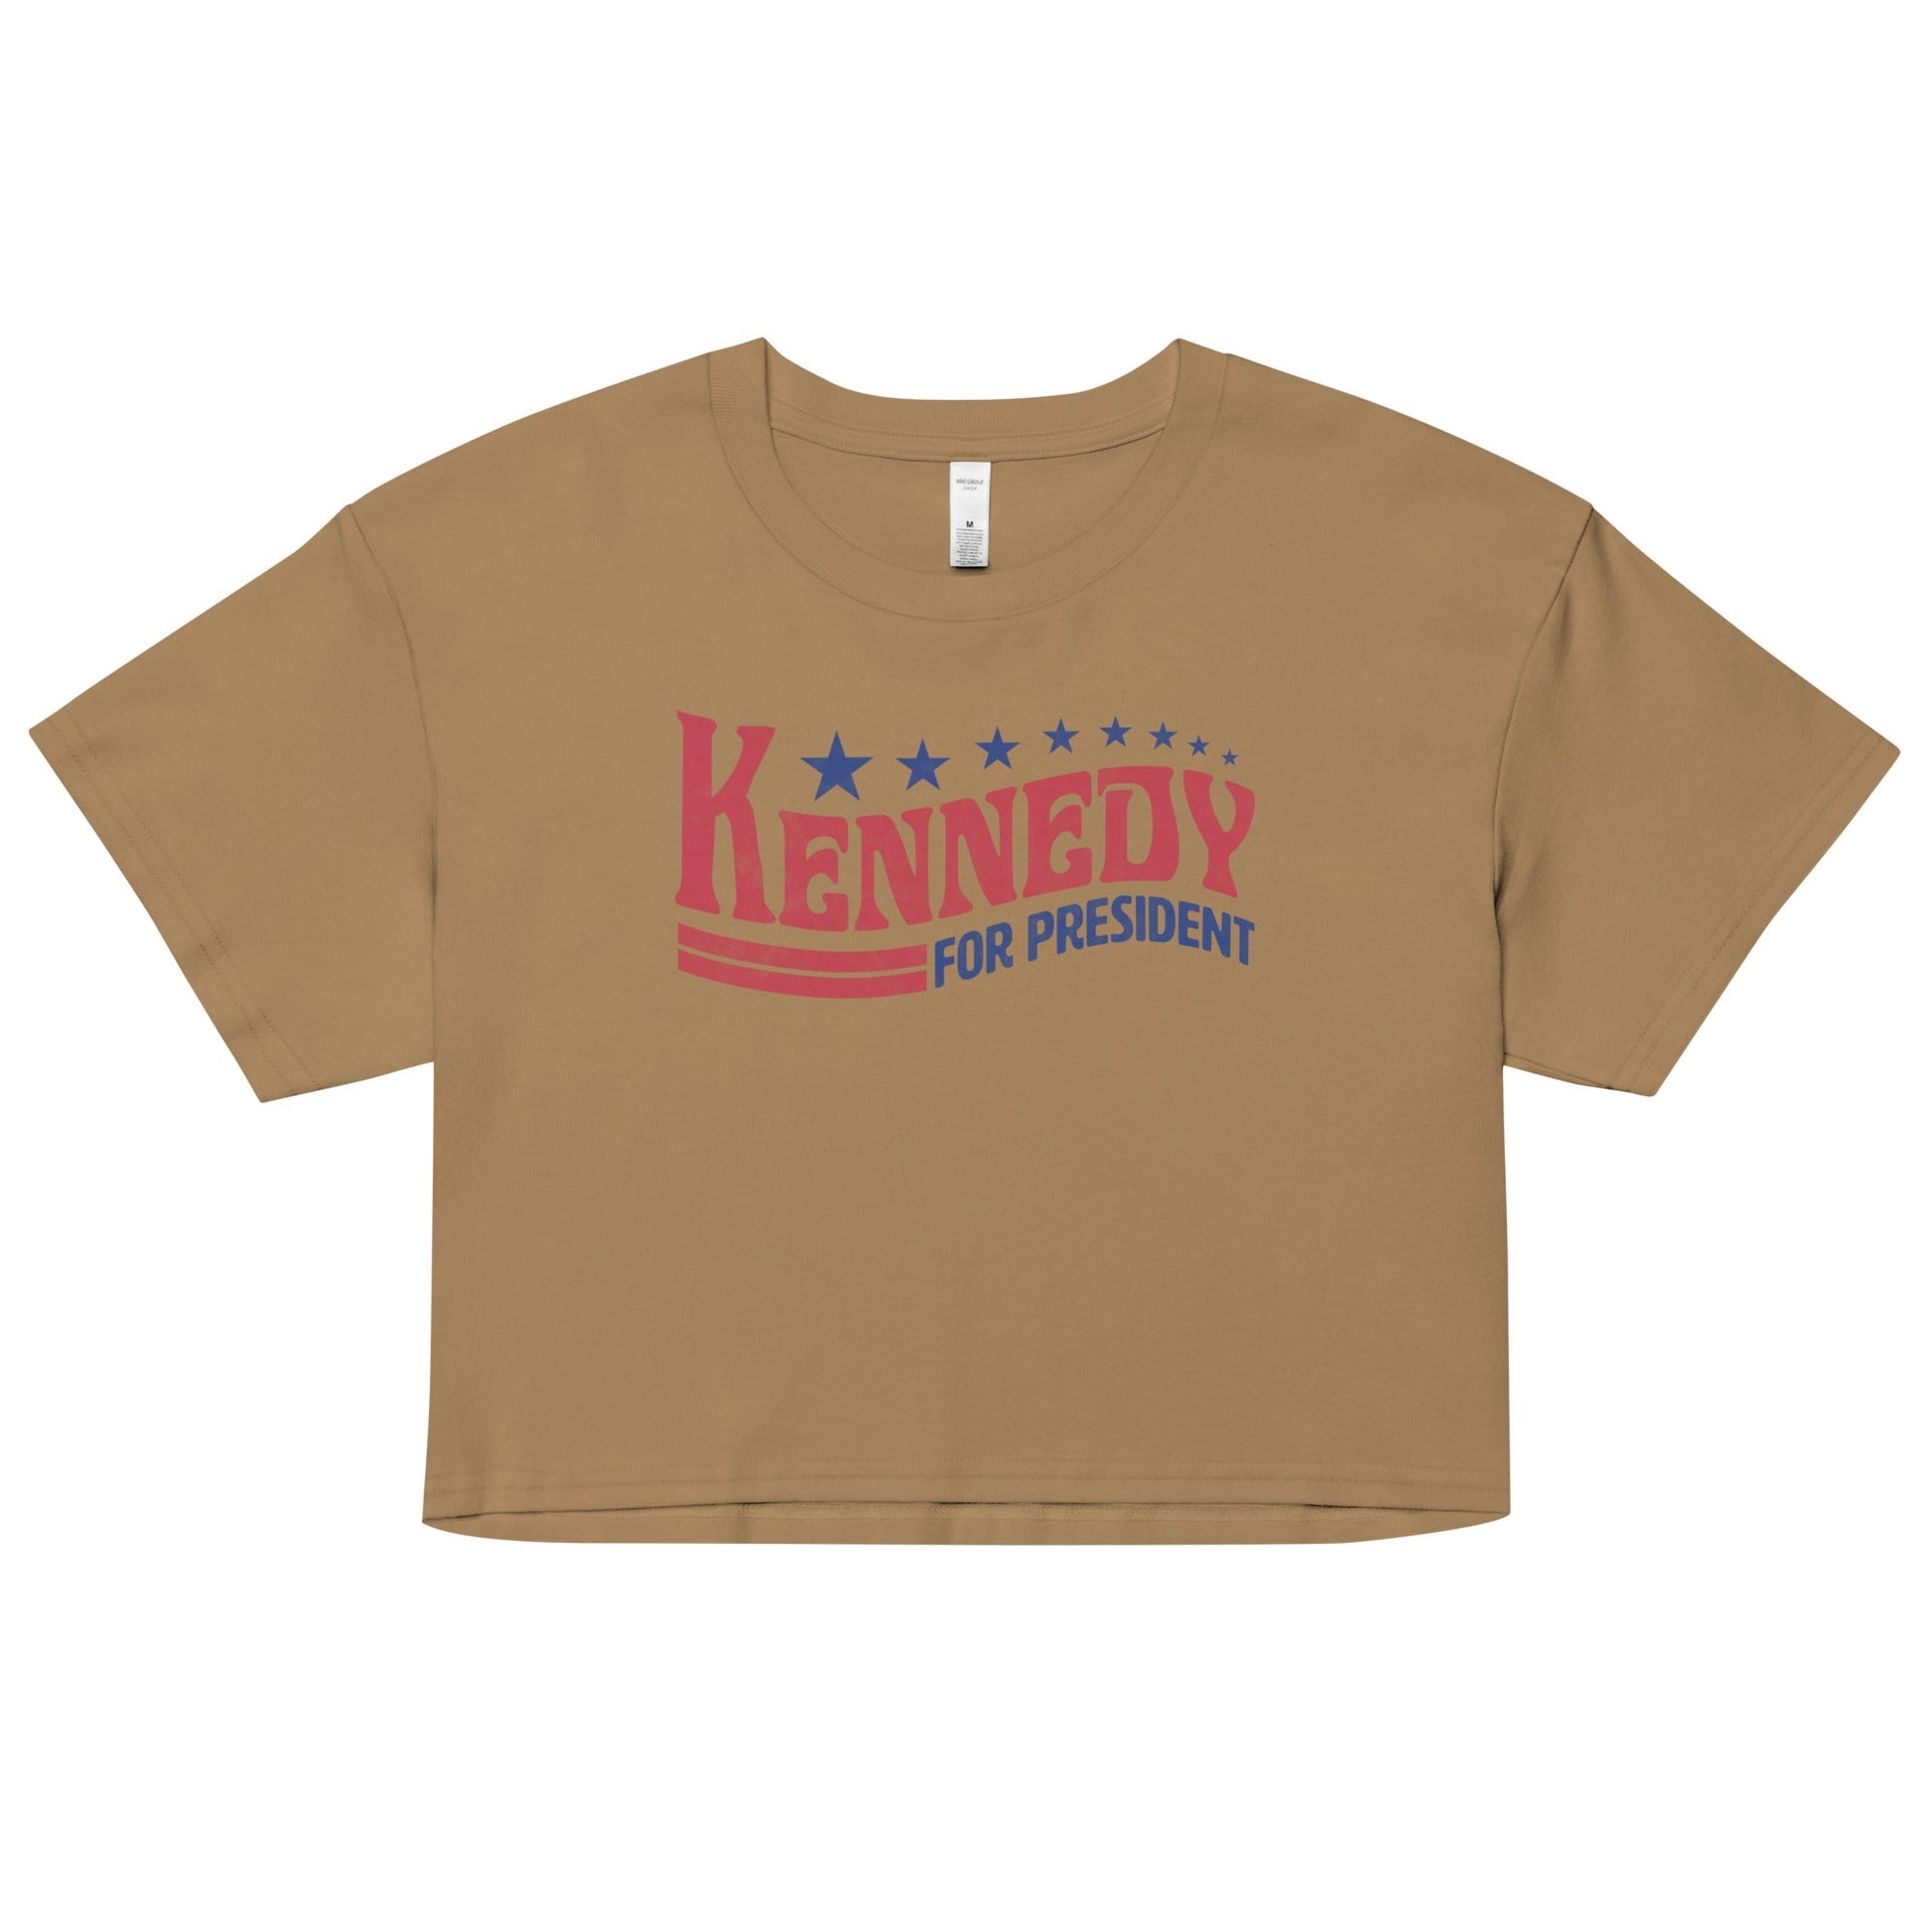 Kennedy for President Vintage Women’s Crop Top - TEAM KENNEDY. All rights reserved